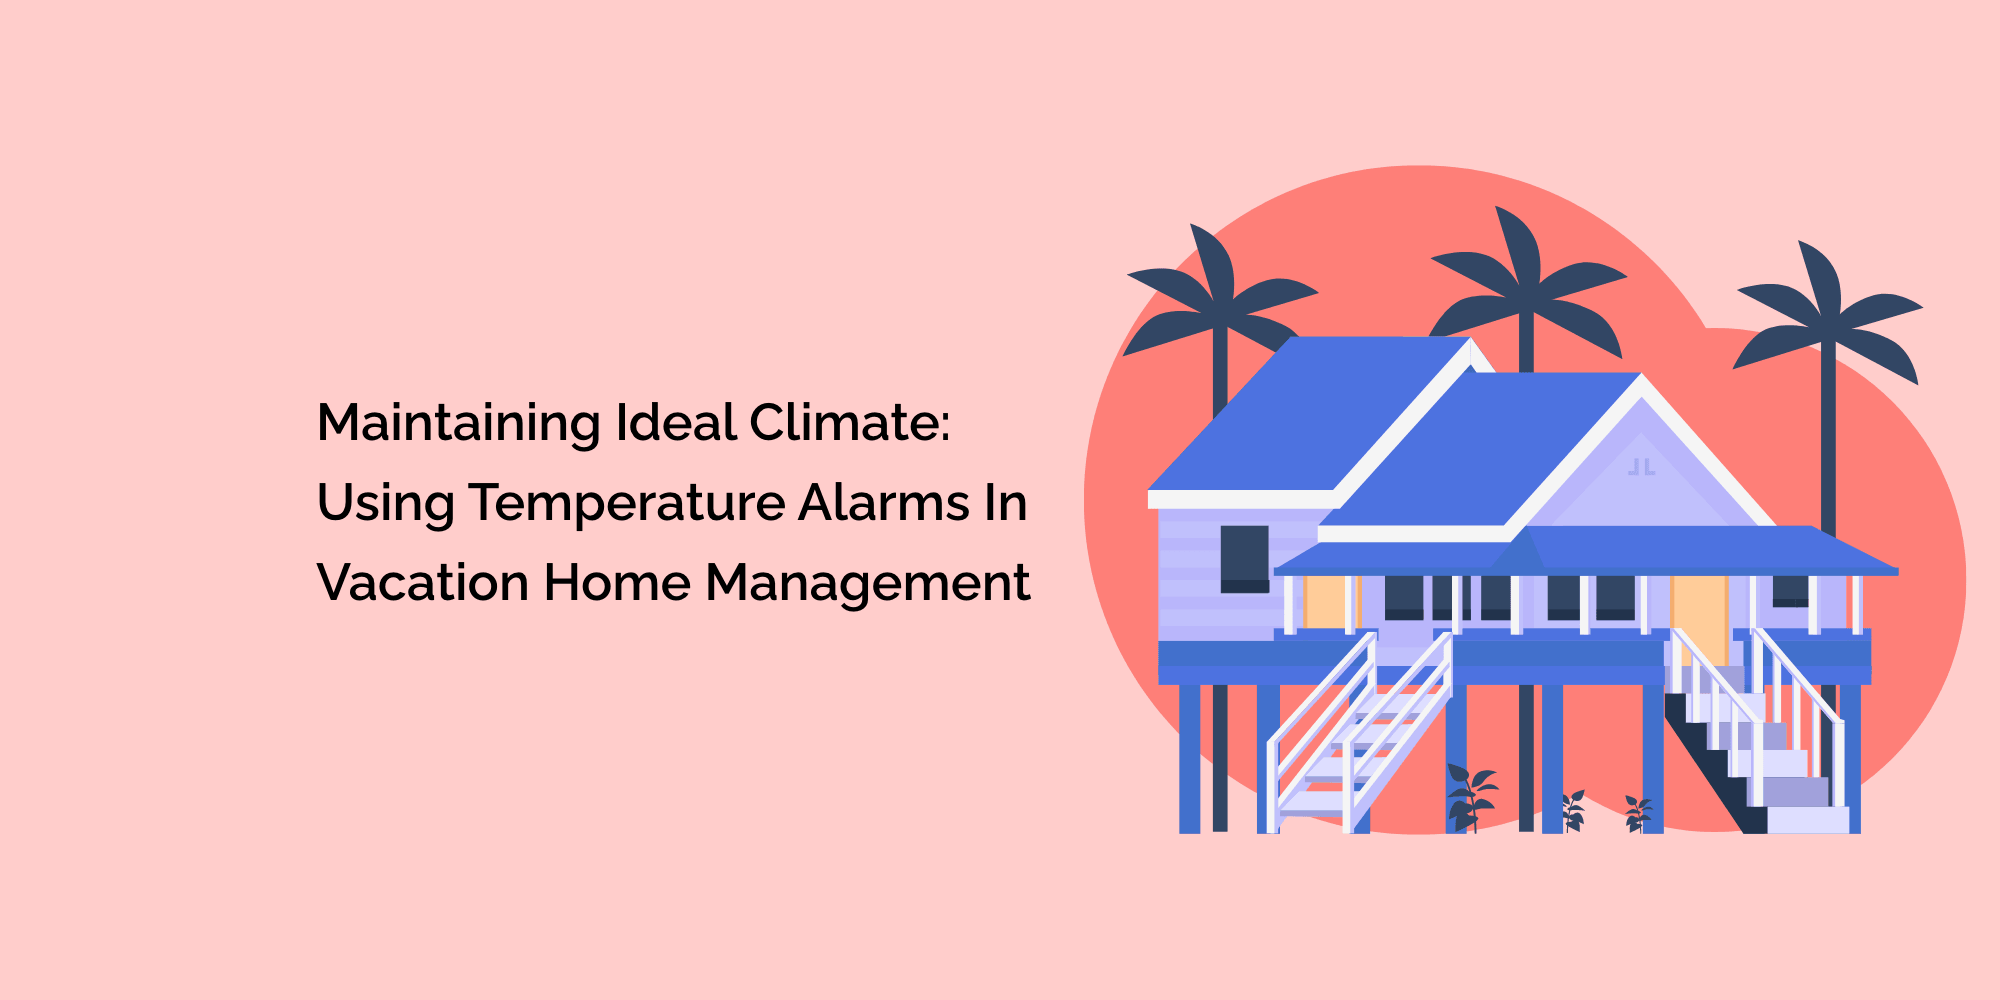 Maintaining Ideal Climate: Using Temperature Alarms in Vacation Home Management